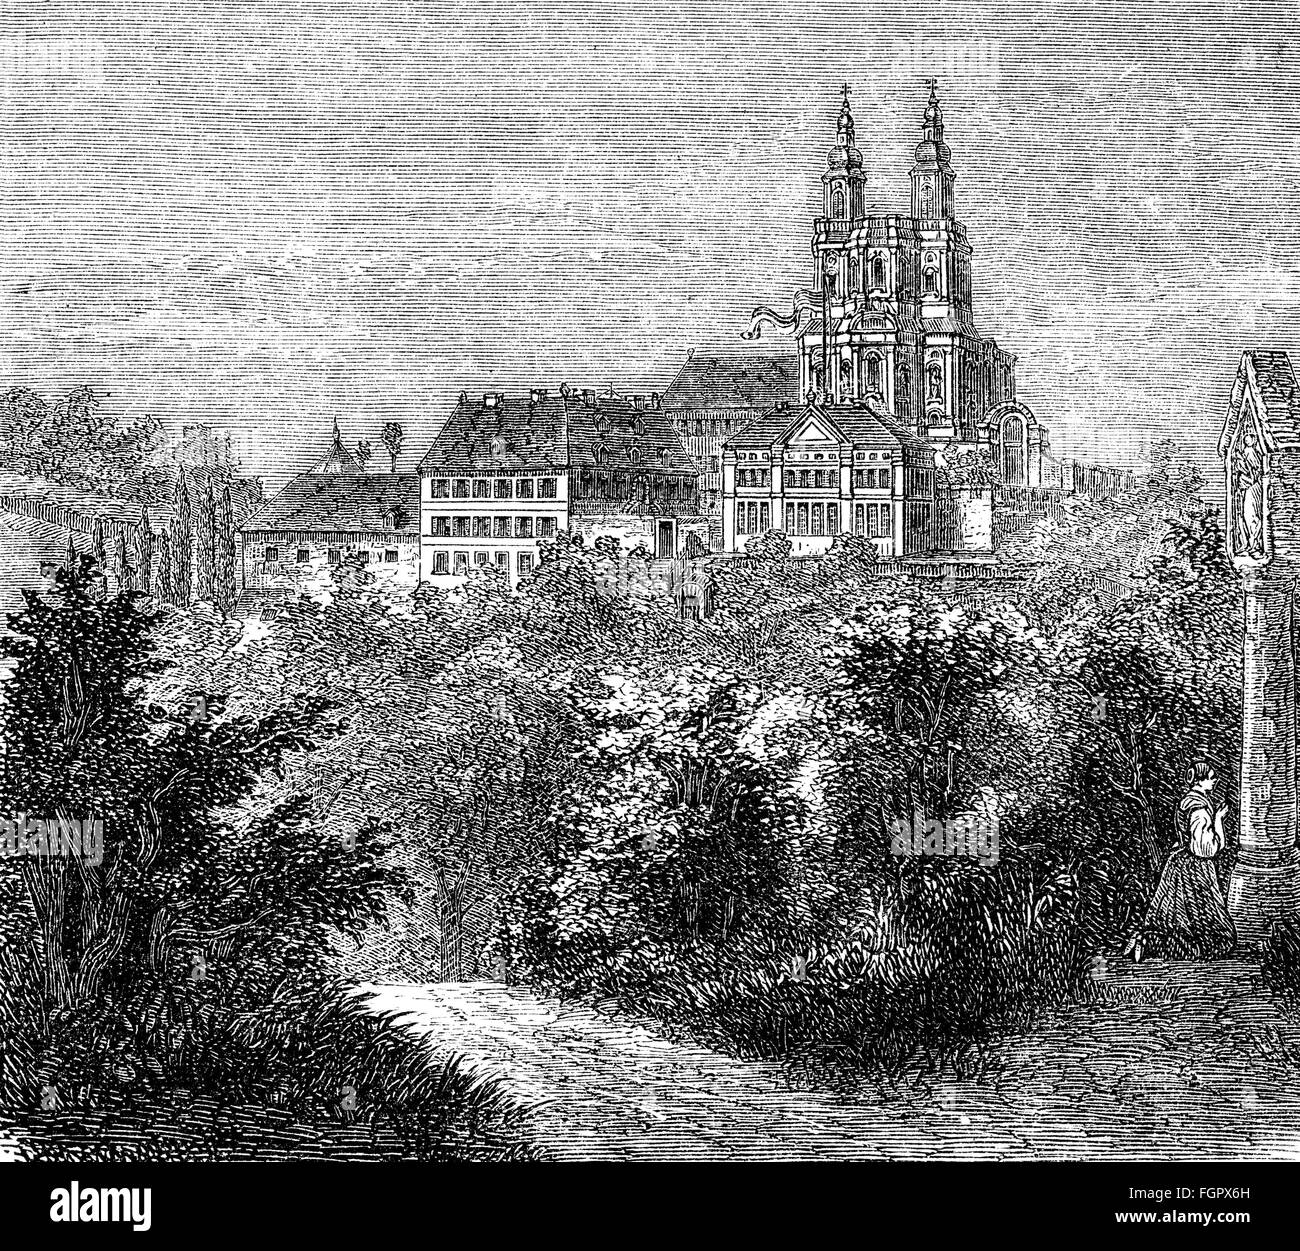 geography / travel, Germany, castles, Banz Castle, exterior view, wood engraving, late 19th century, monastery, Bad Staffelstein, kingdom of Bavaria, Upper Franconia, Imperial Era, German Empire, Central Europe, historic, historical, Additional-Rights-Clearences-Not Available Stock Photo